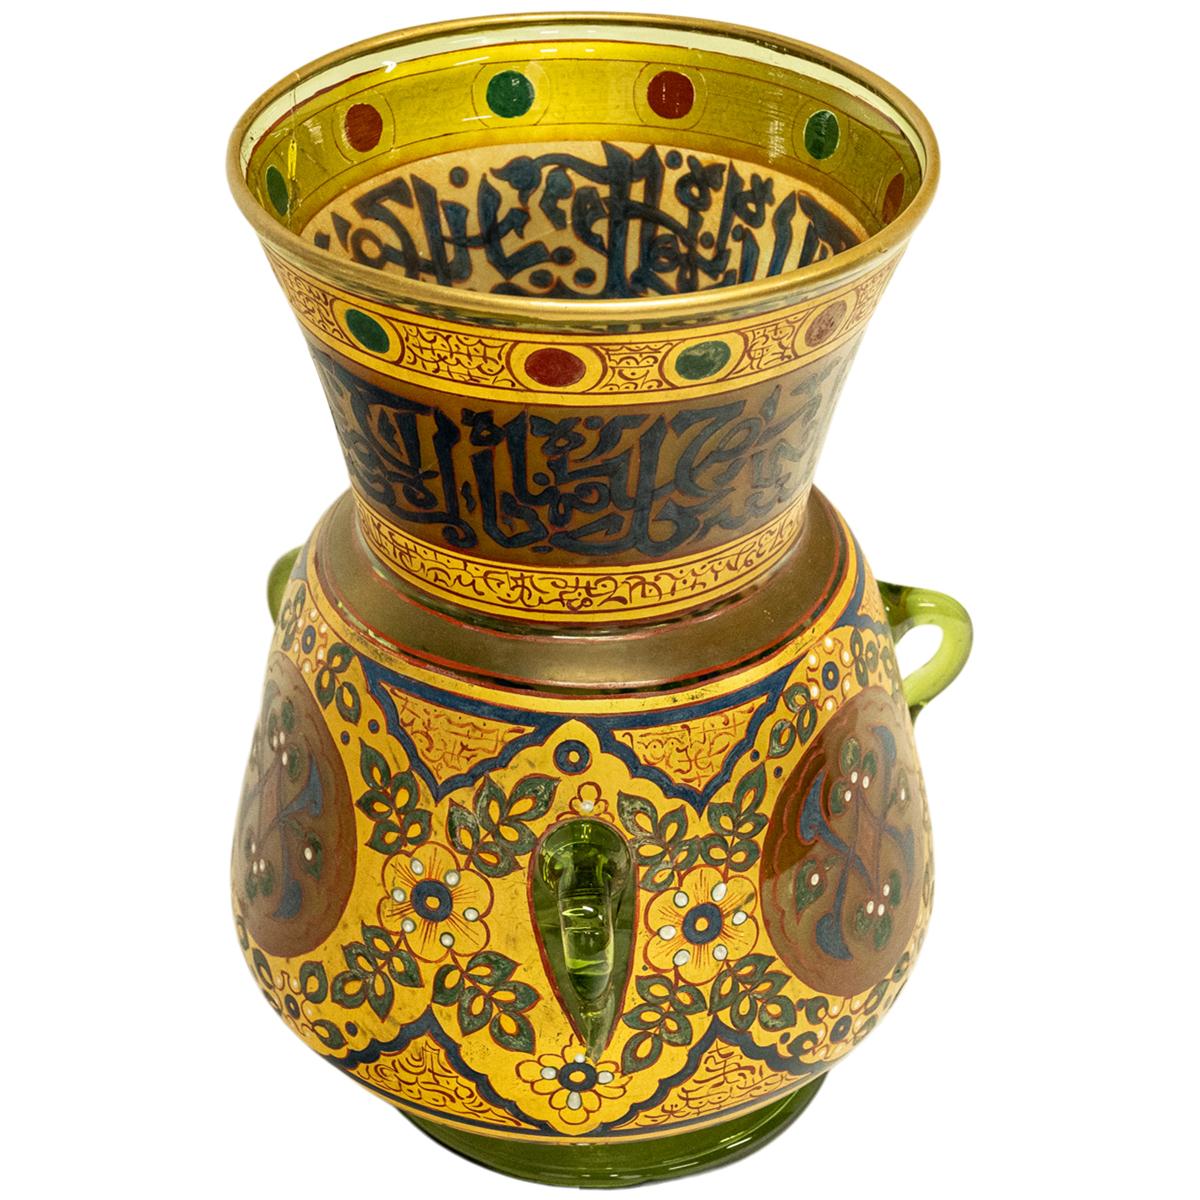 Antique French Islamic Glass Enamel Gilt Mamluk Revival Mosque Lamp Brocard 1880 For Sale 6